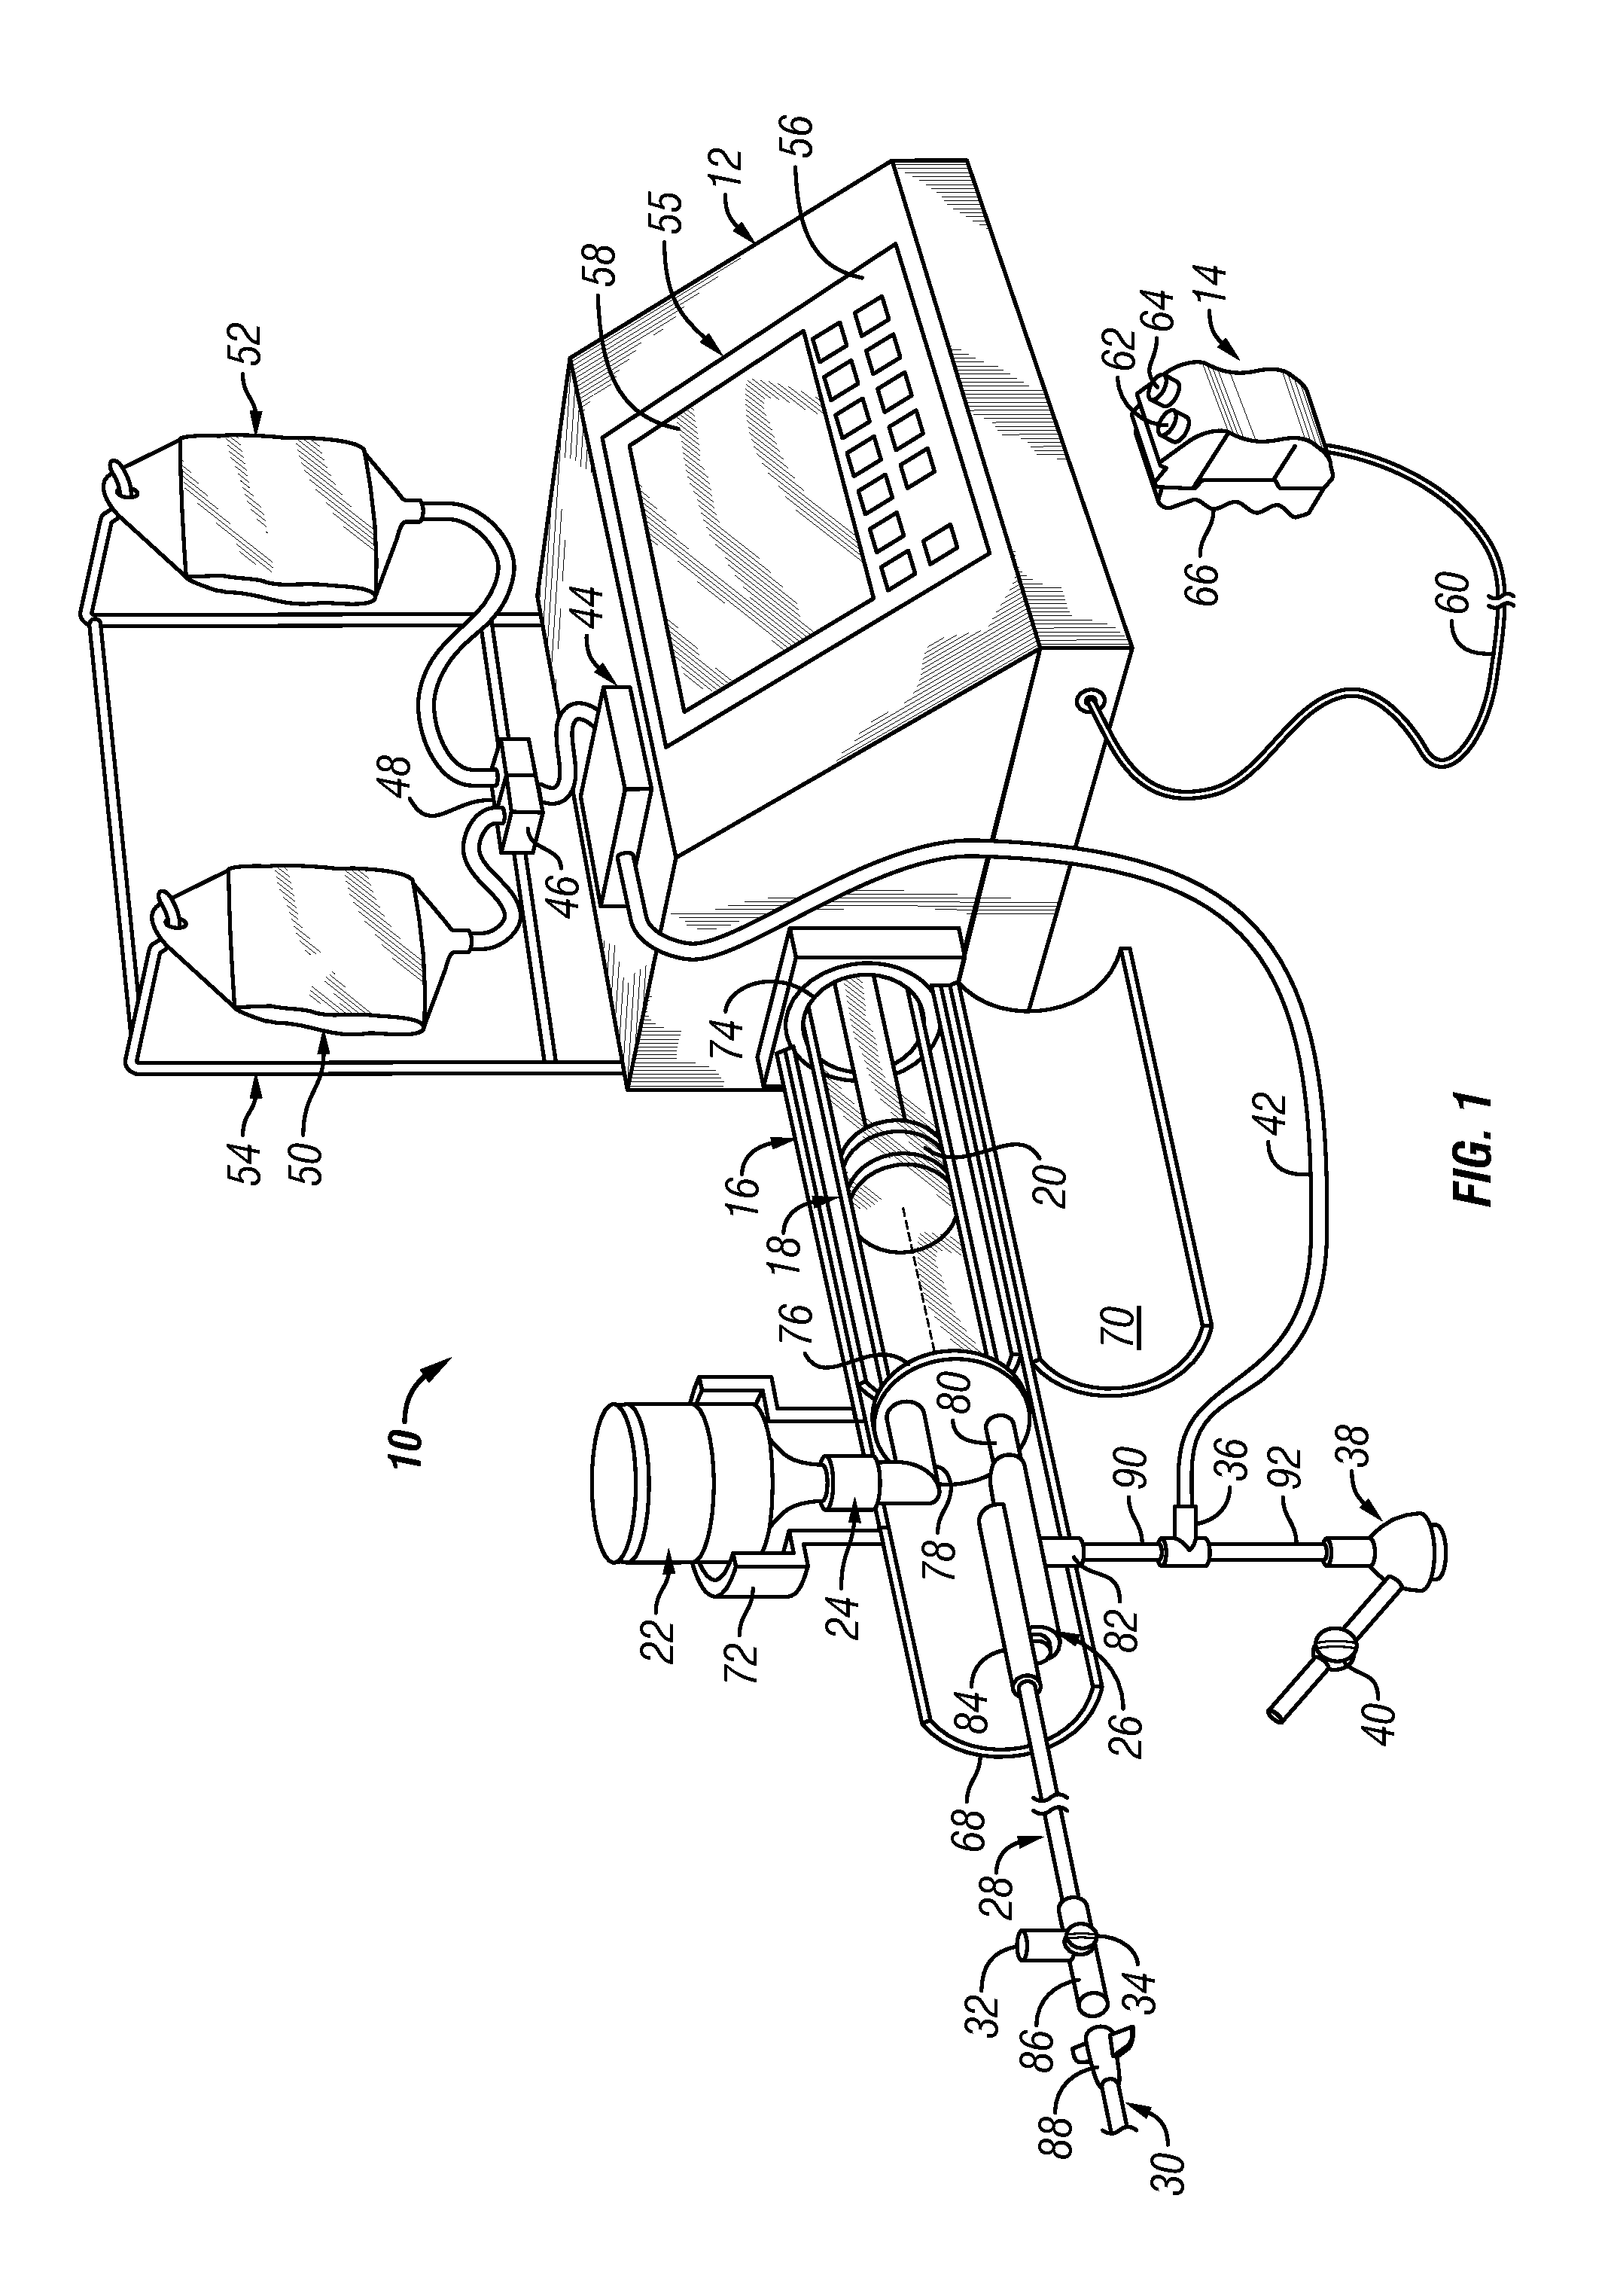 Medical fluid injection system